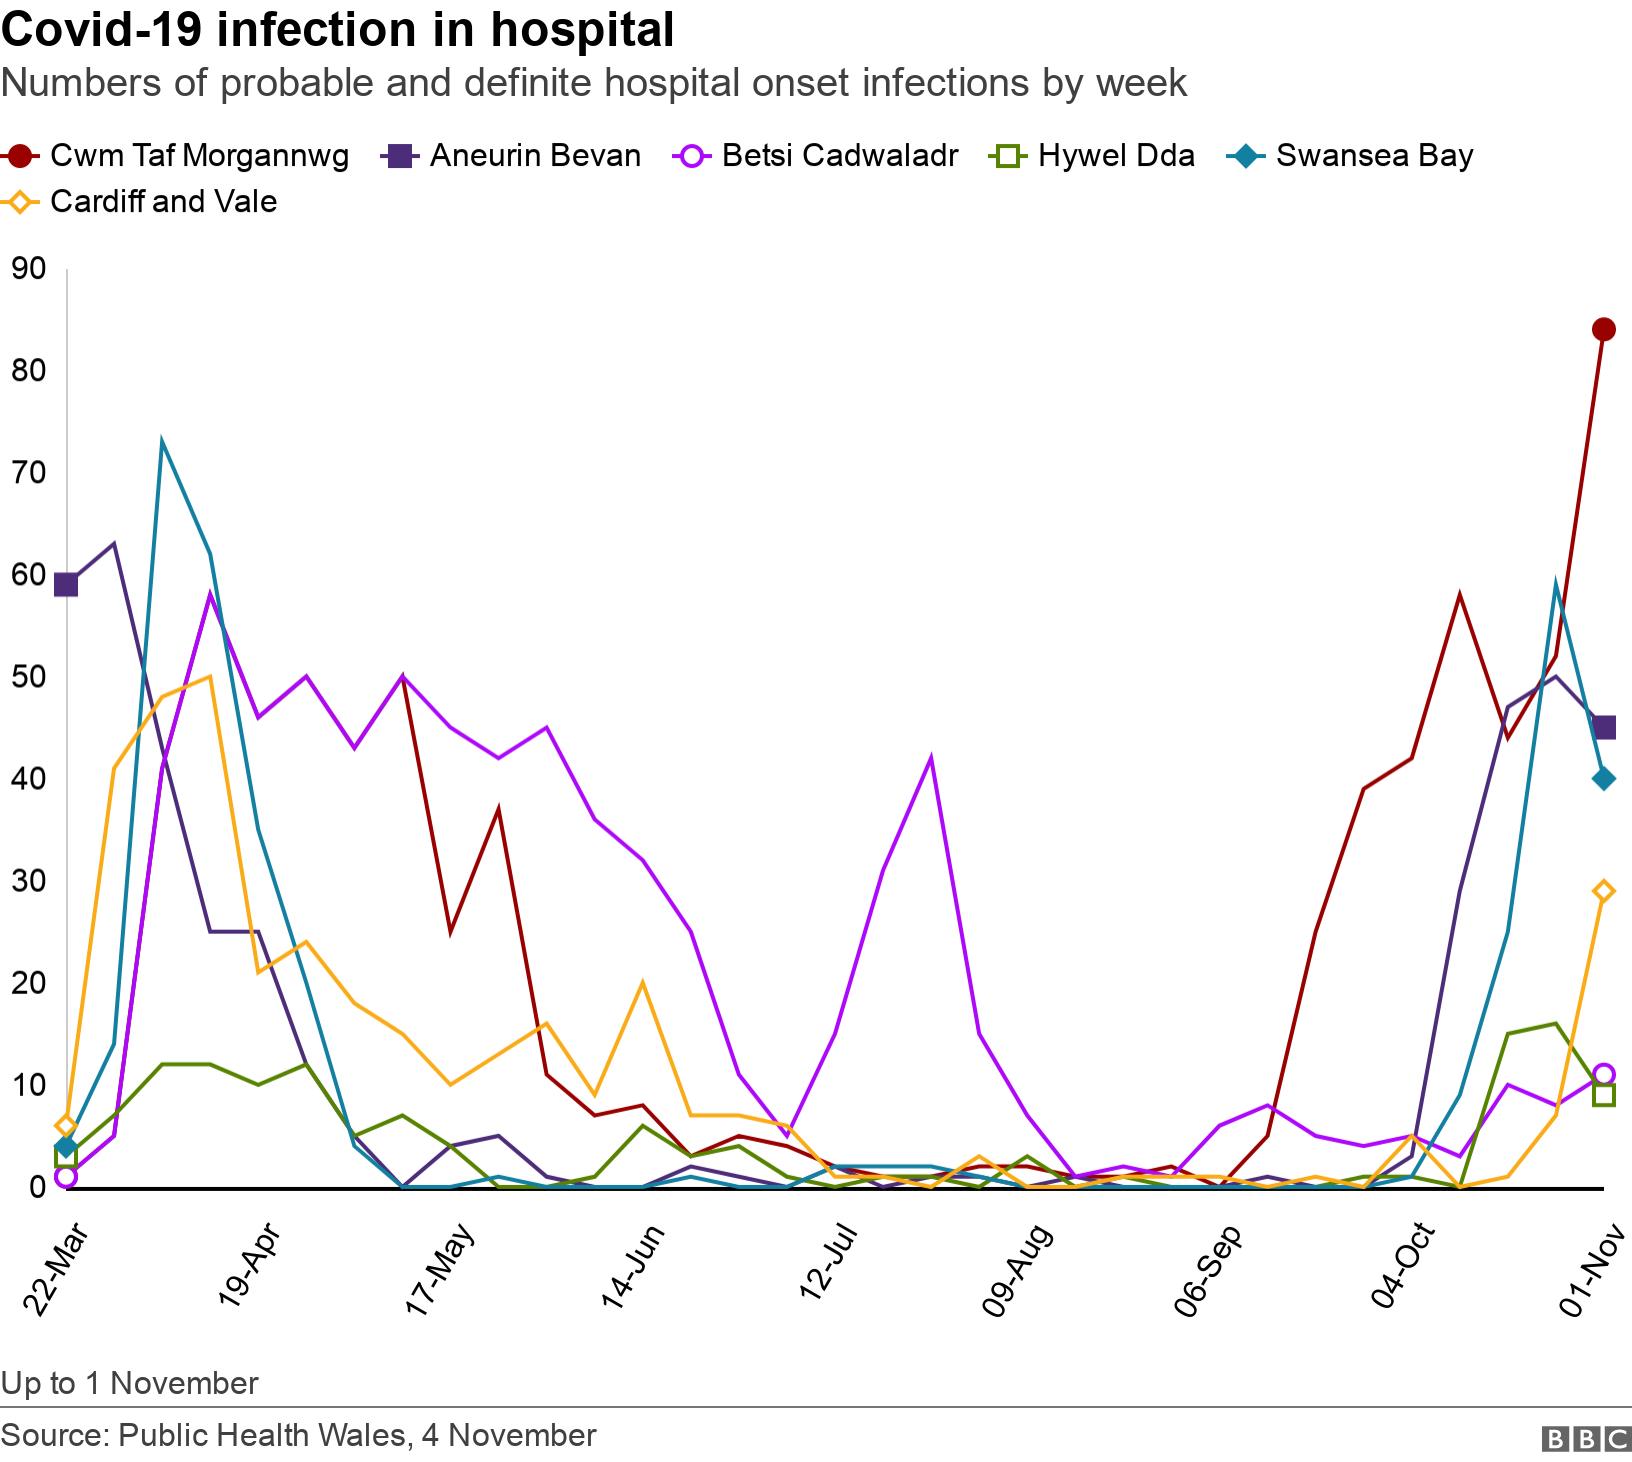 Covid-19 infection in hospital. Numbers of probable and definite hospital onset infections by week. Up to 1 November.